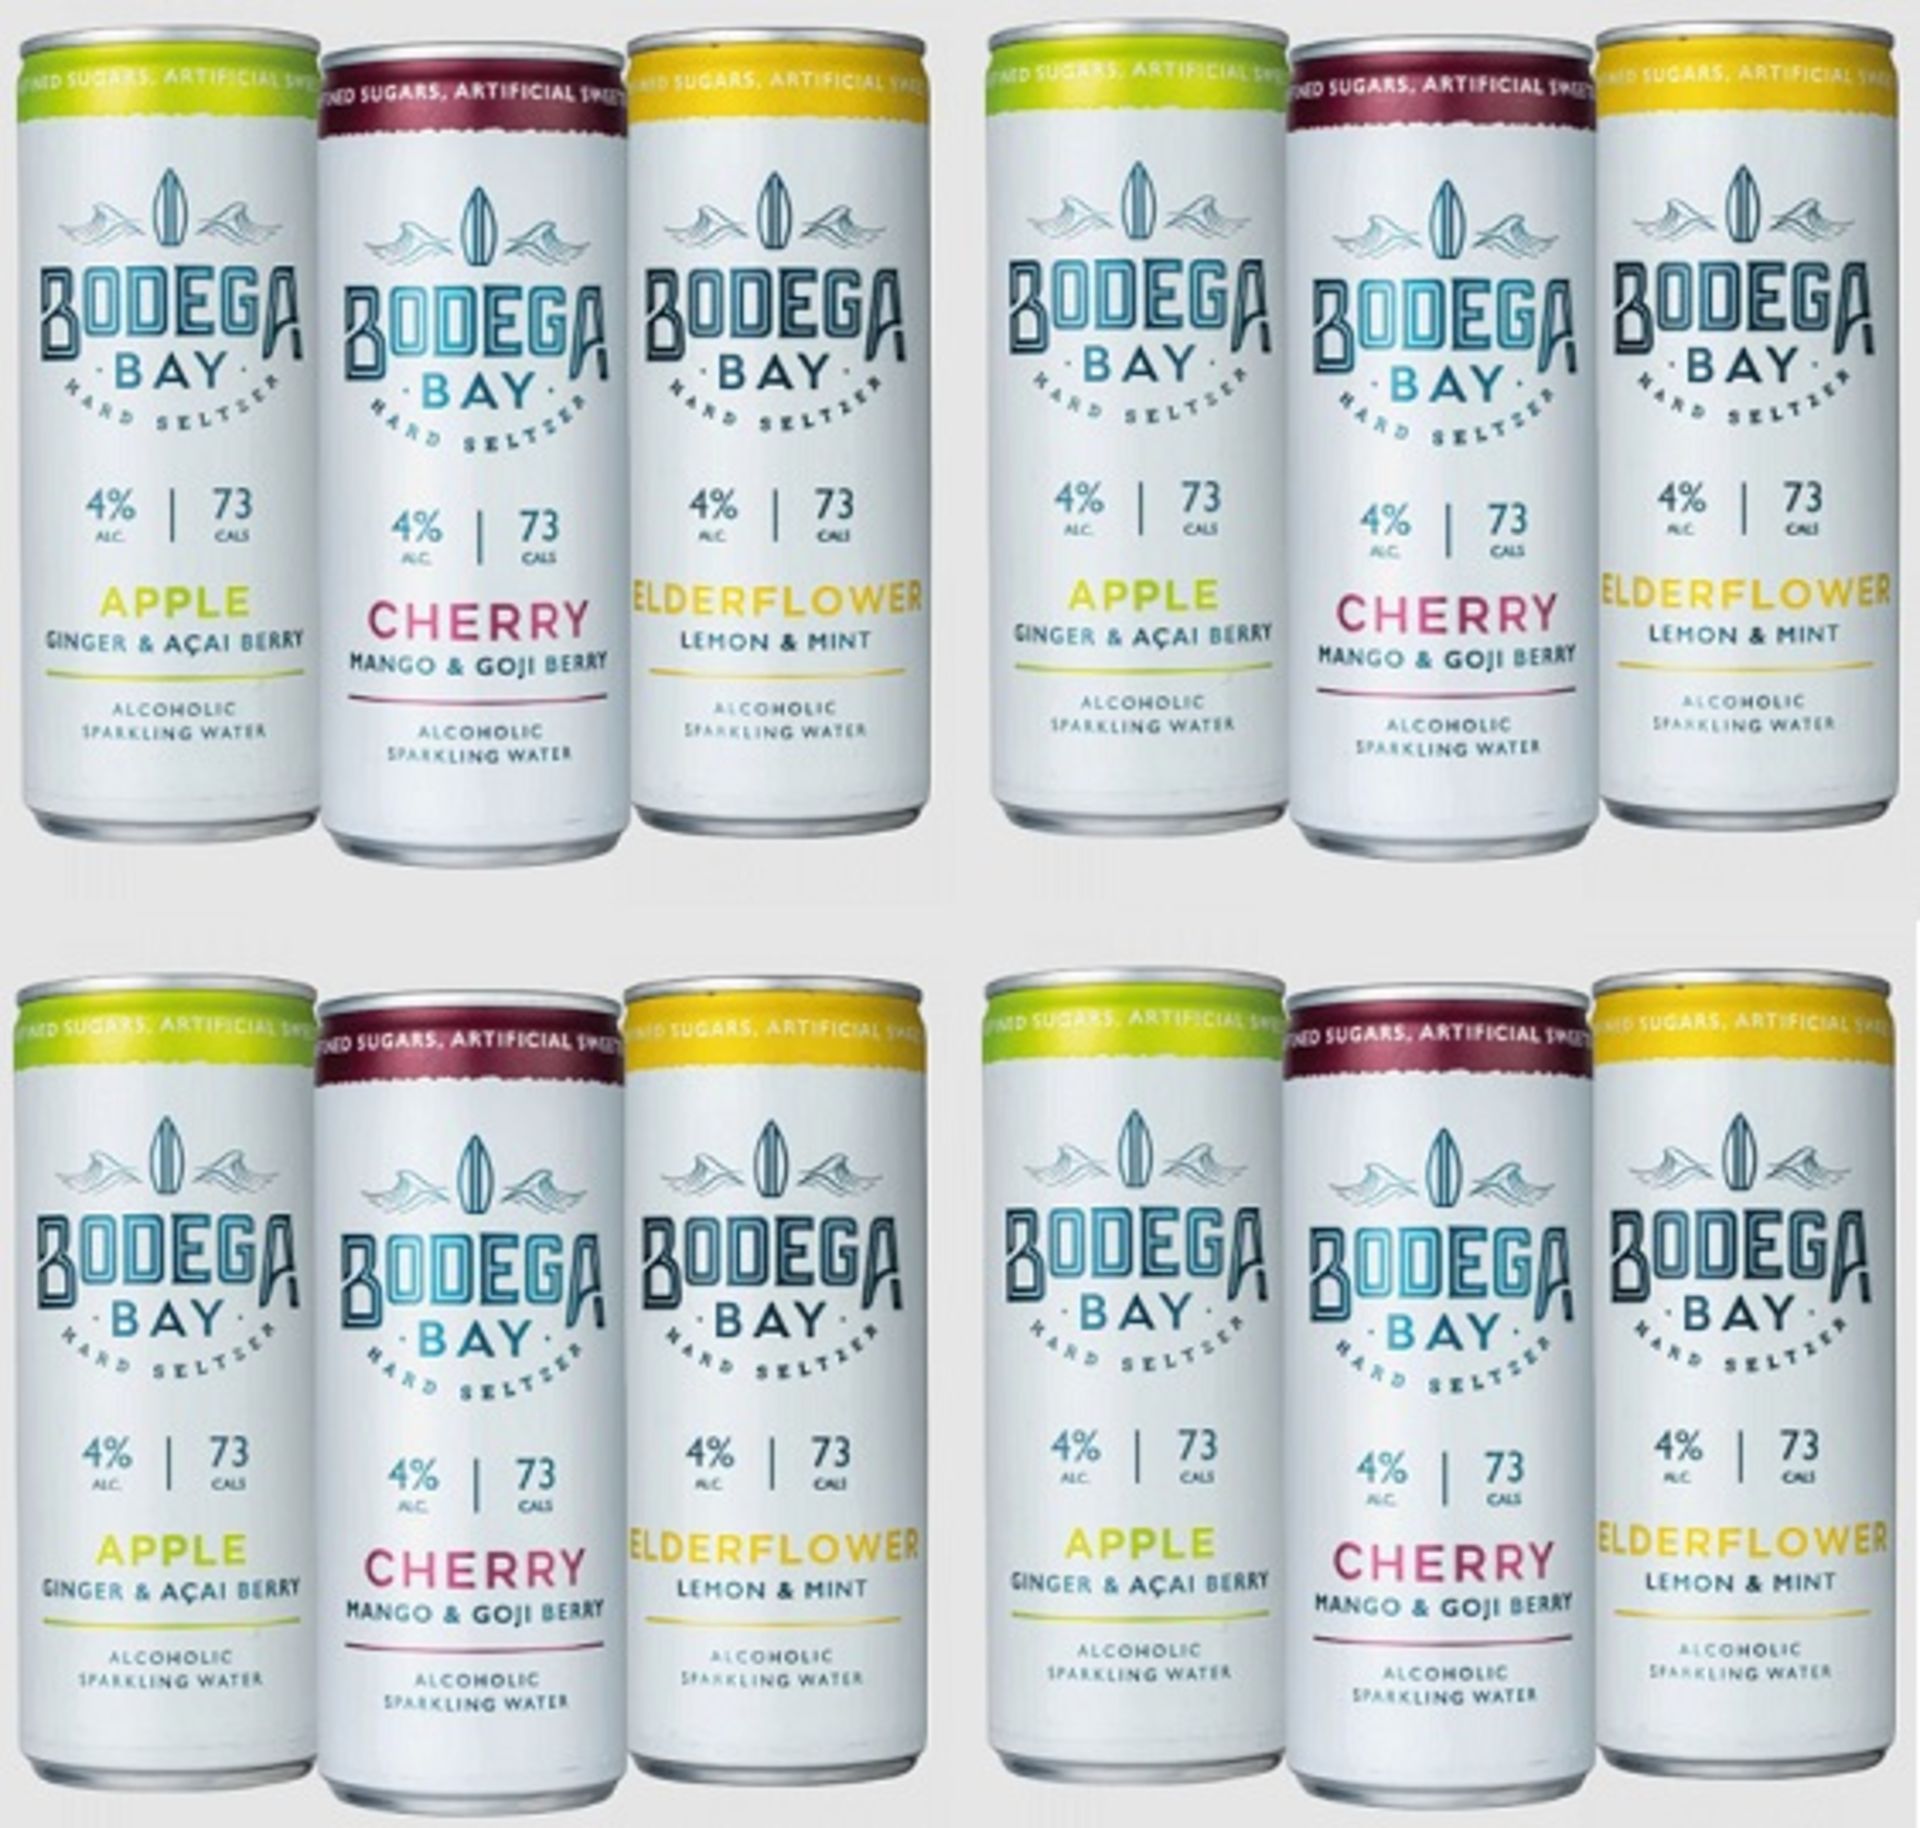 1,080 x Cans of Bodega Bay Hard Seltzer 250ml Alcoholic Sparkling Water Drinks - RESALE JOB LOT